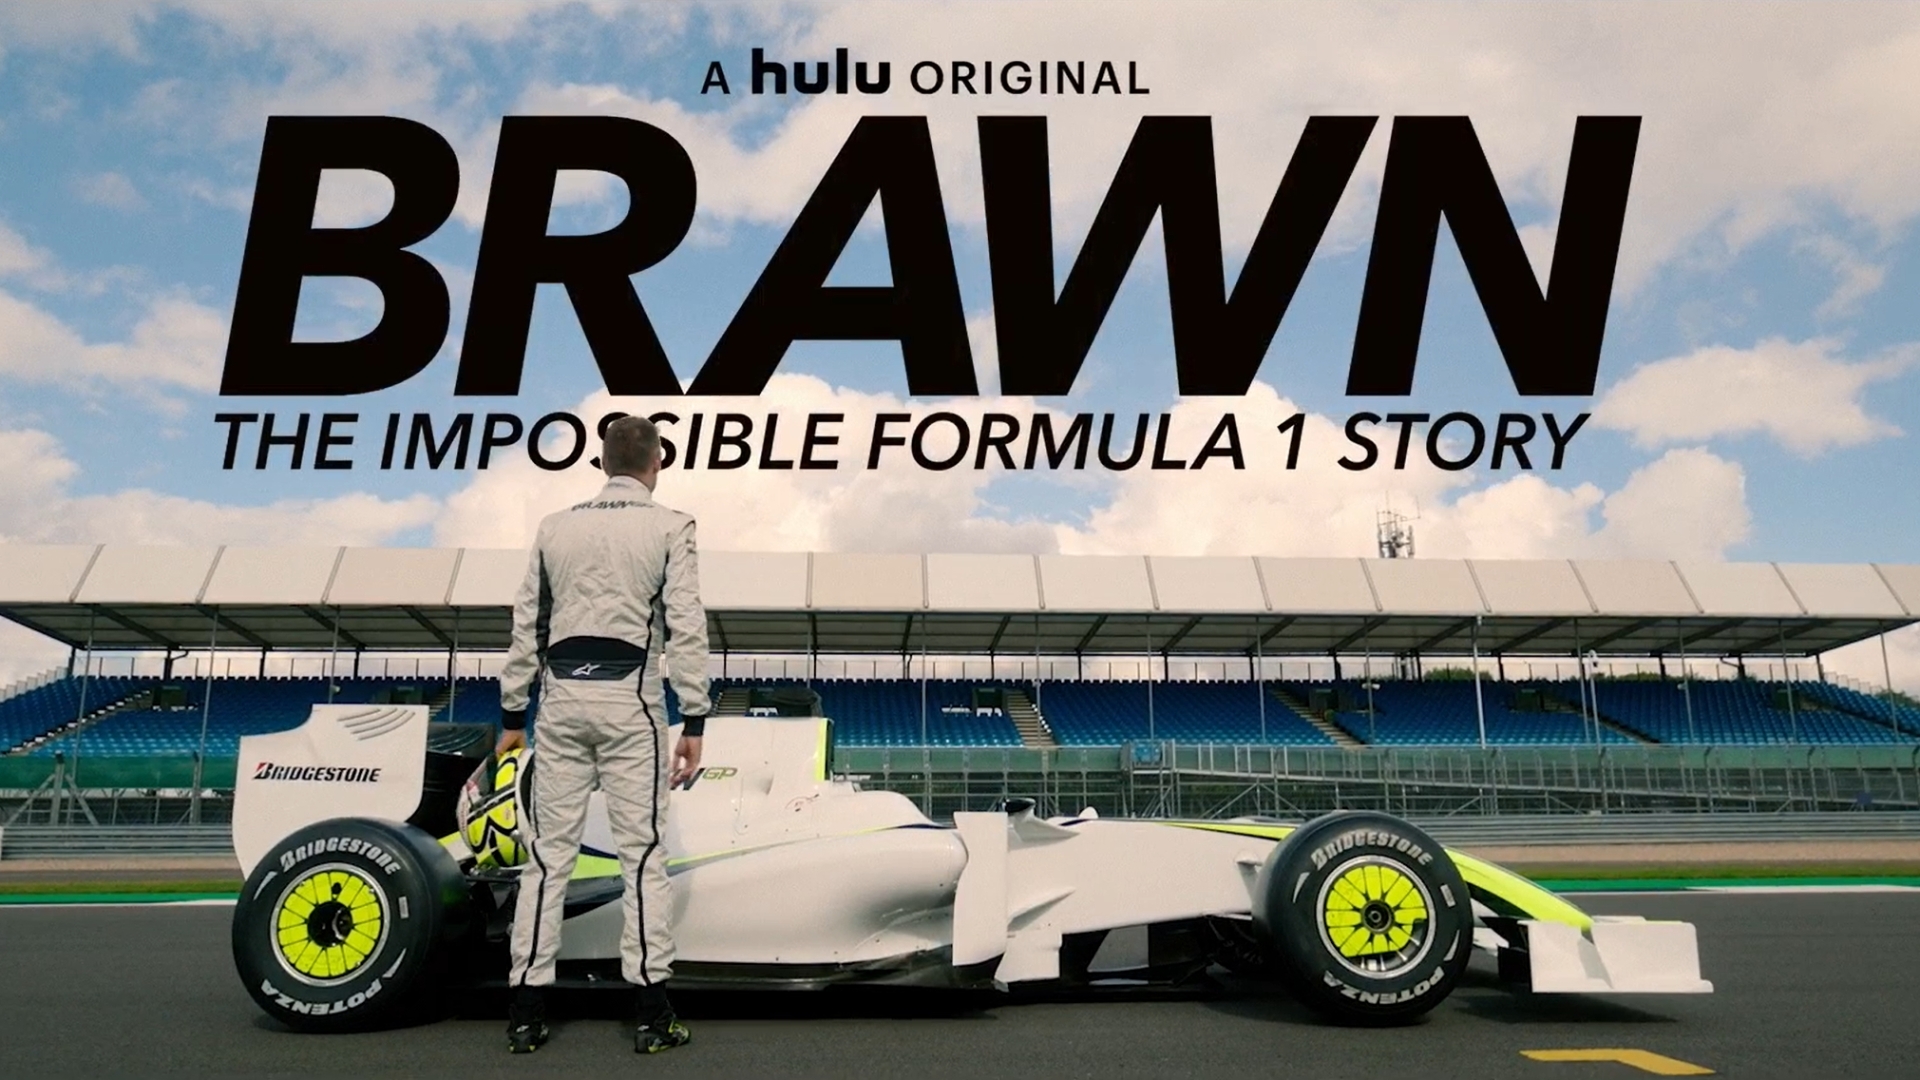 'Brawn: The Impossible Formula 1 Story' trailer